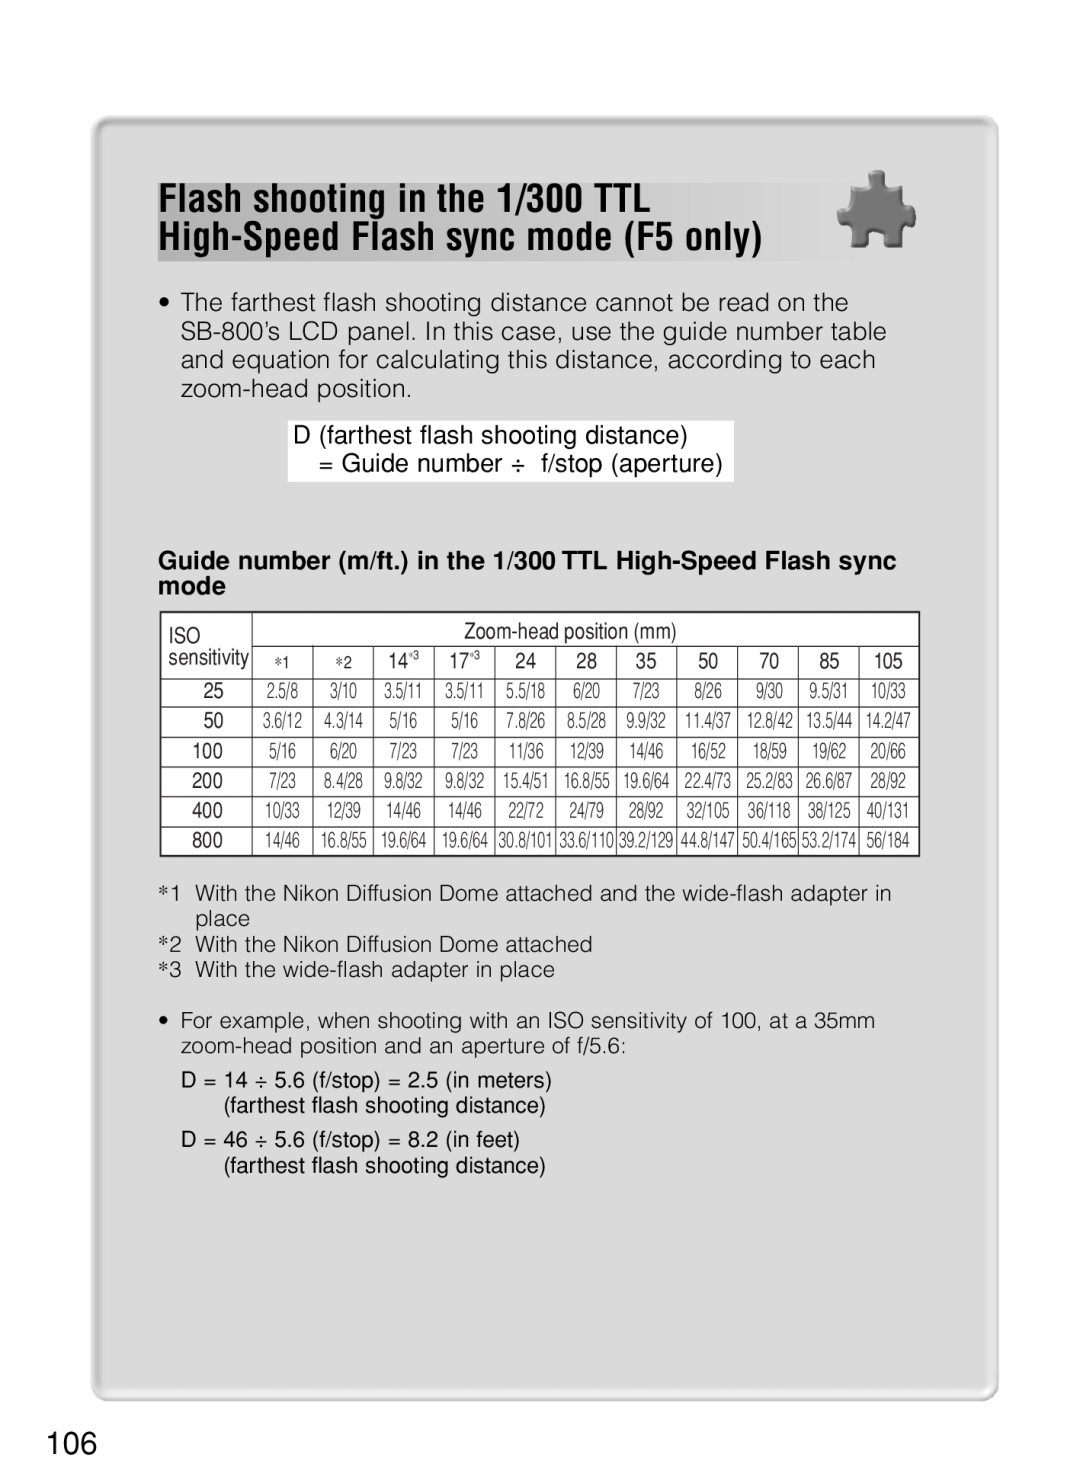 Nikon SB-800 instruction manual Flash shooting in the 1/300 TTL High-Speed Flash sync mode F5 only 